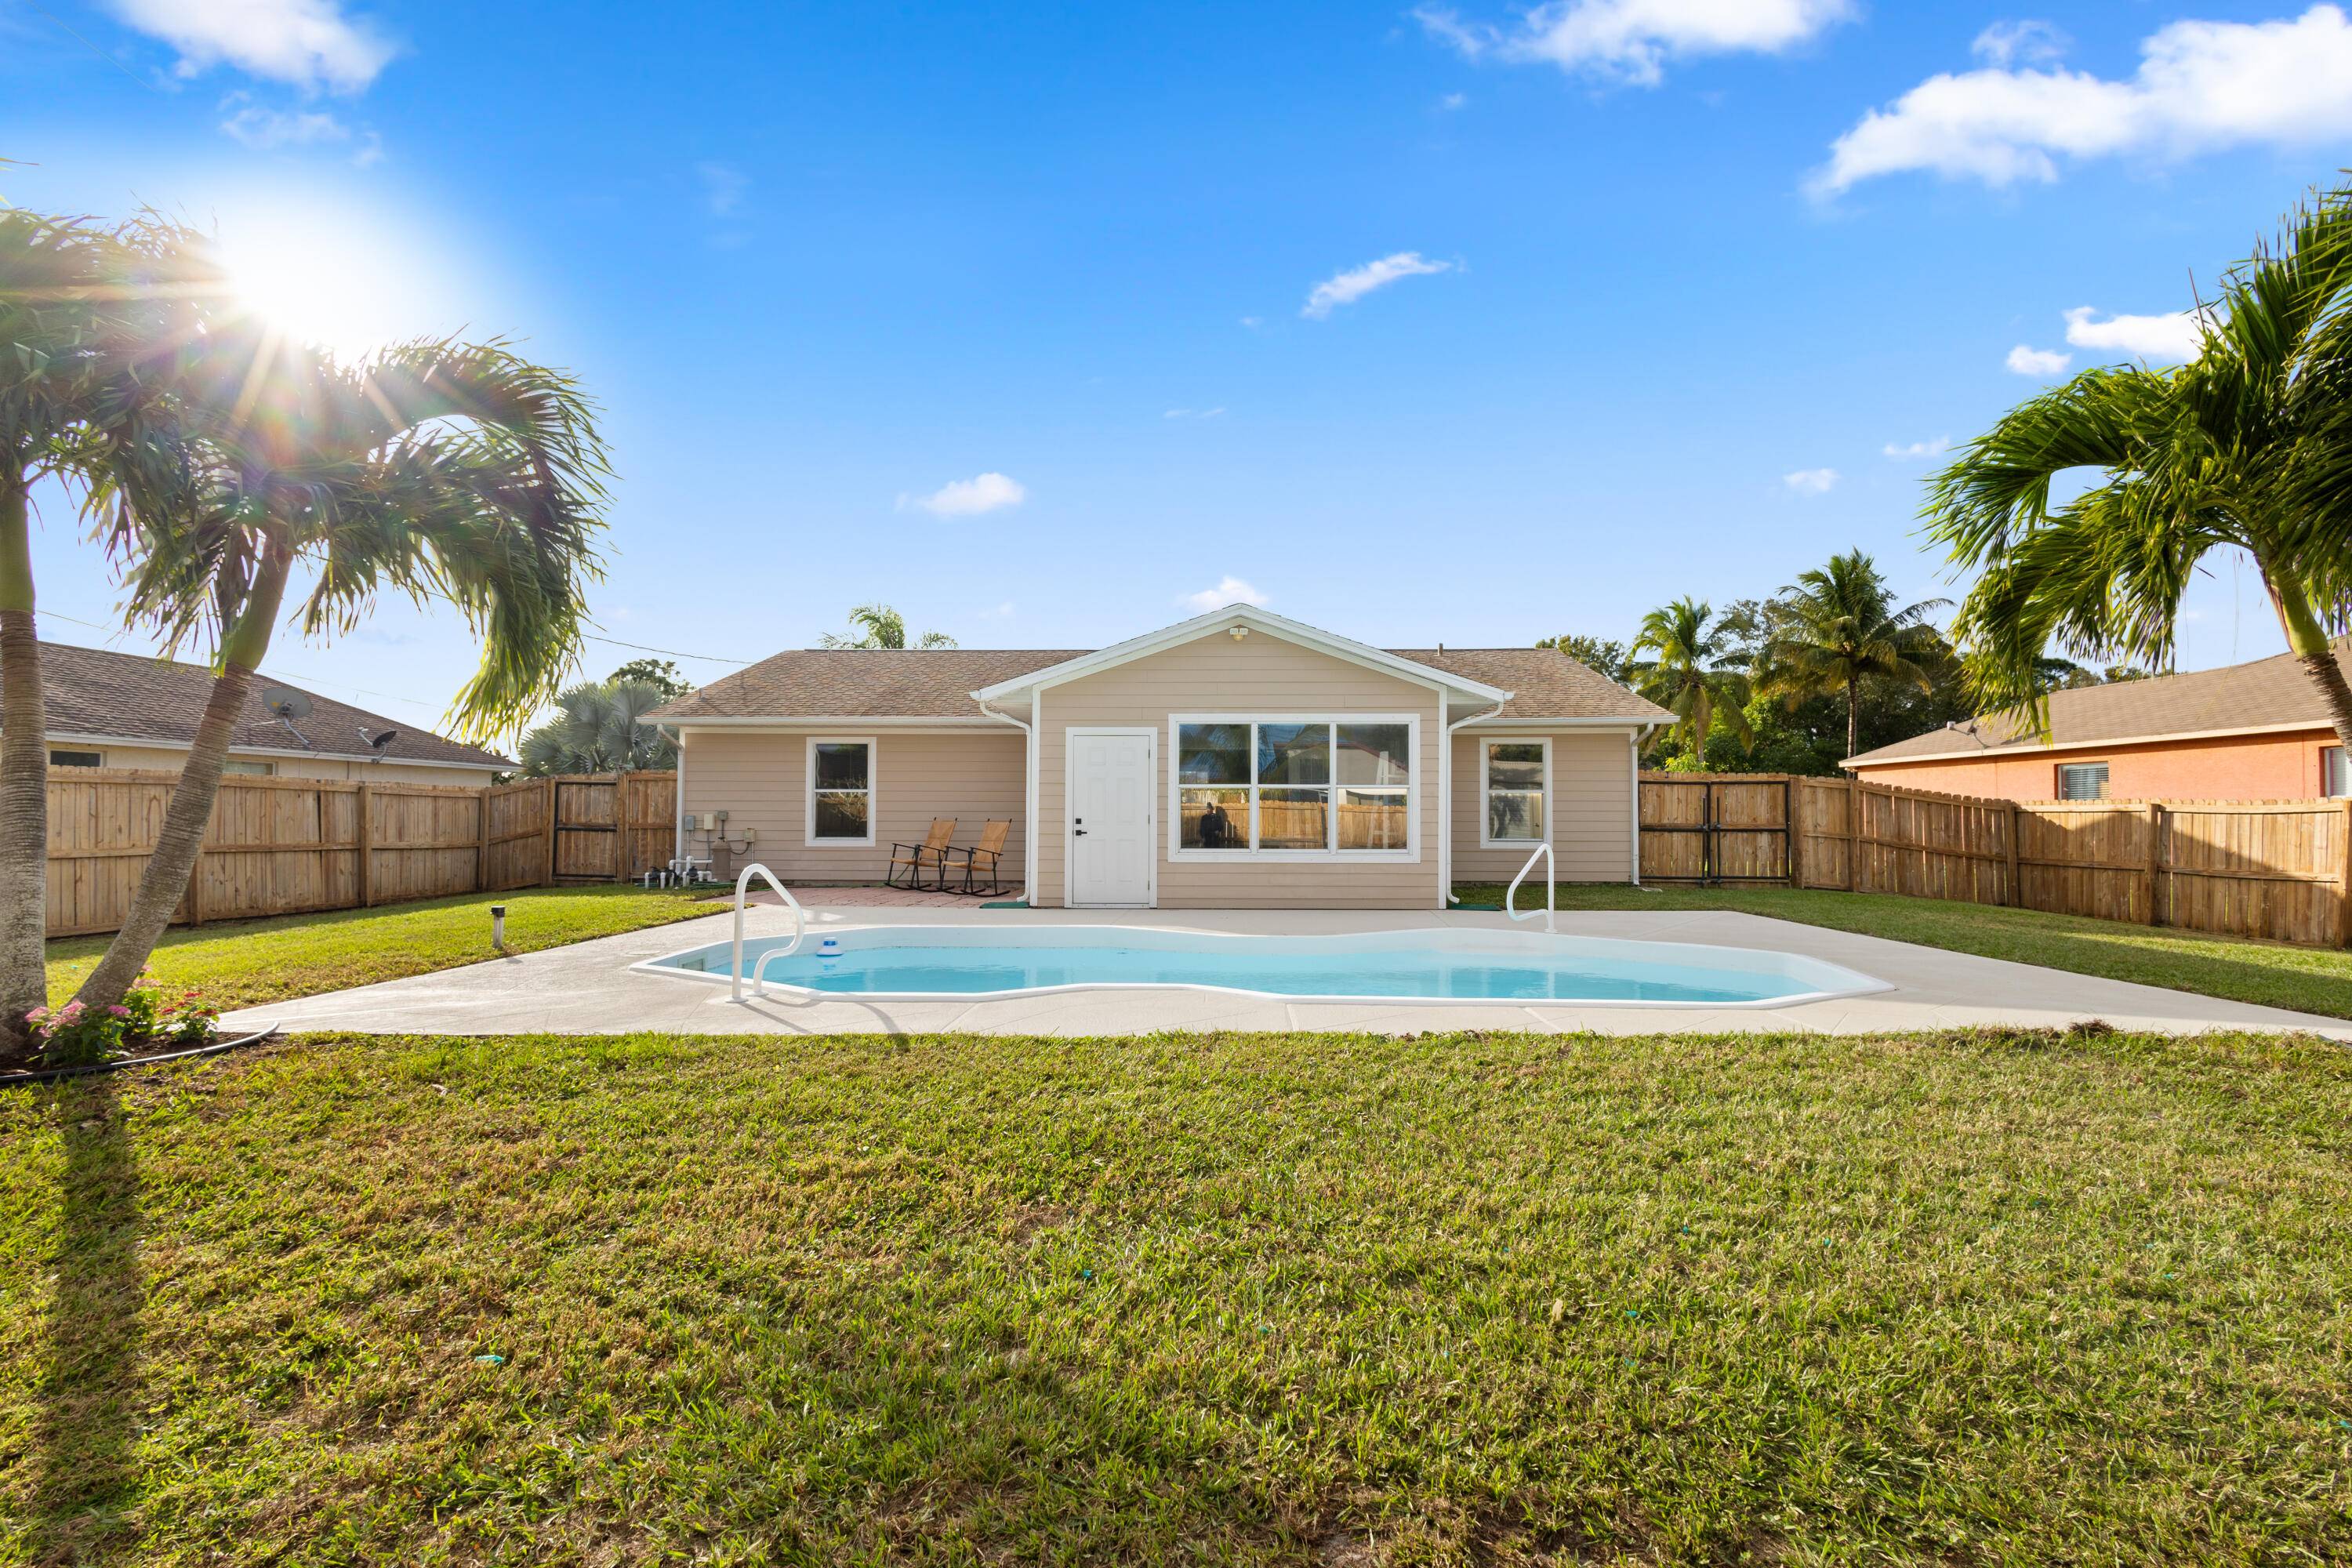 This beautiful renovated pool home has a price improvement.